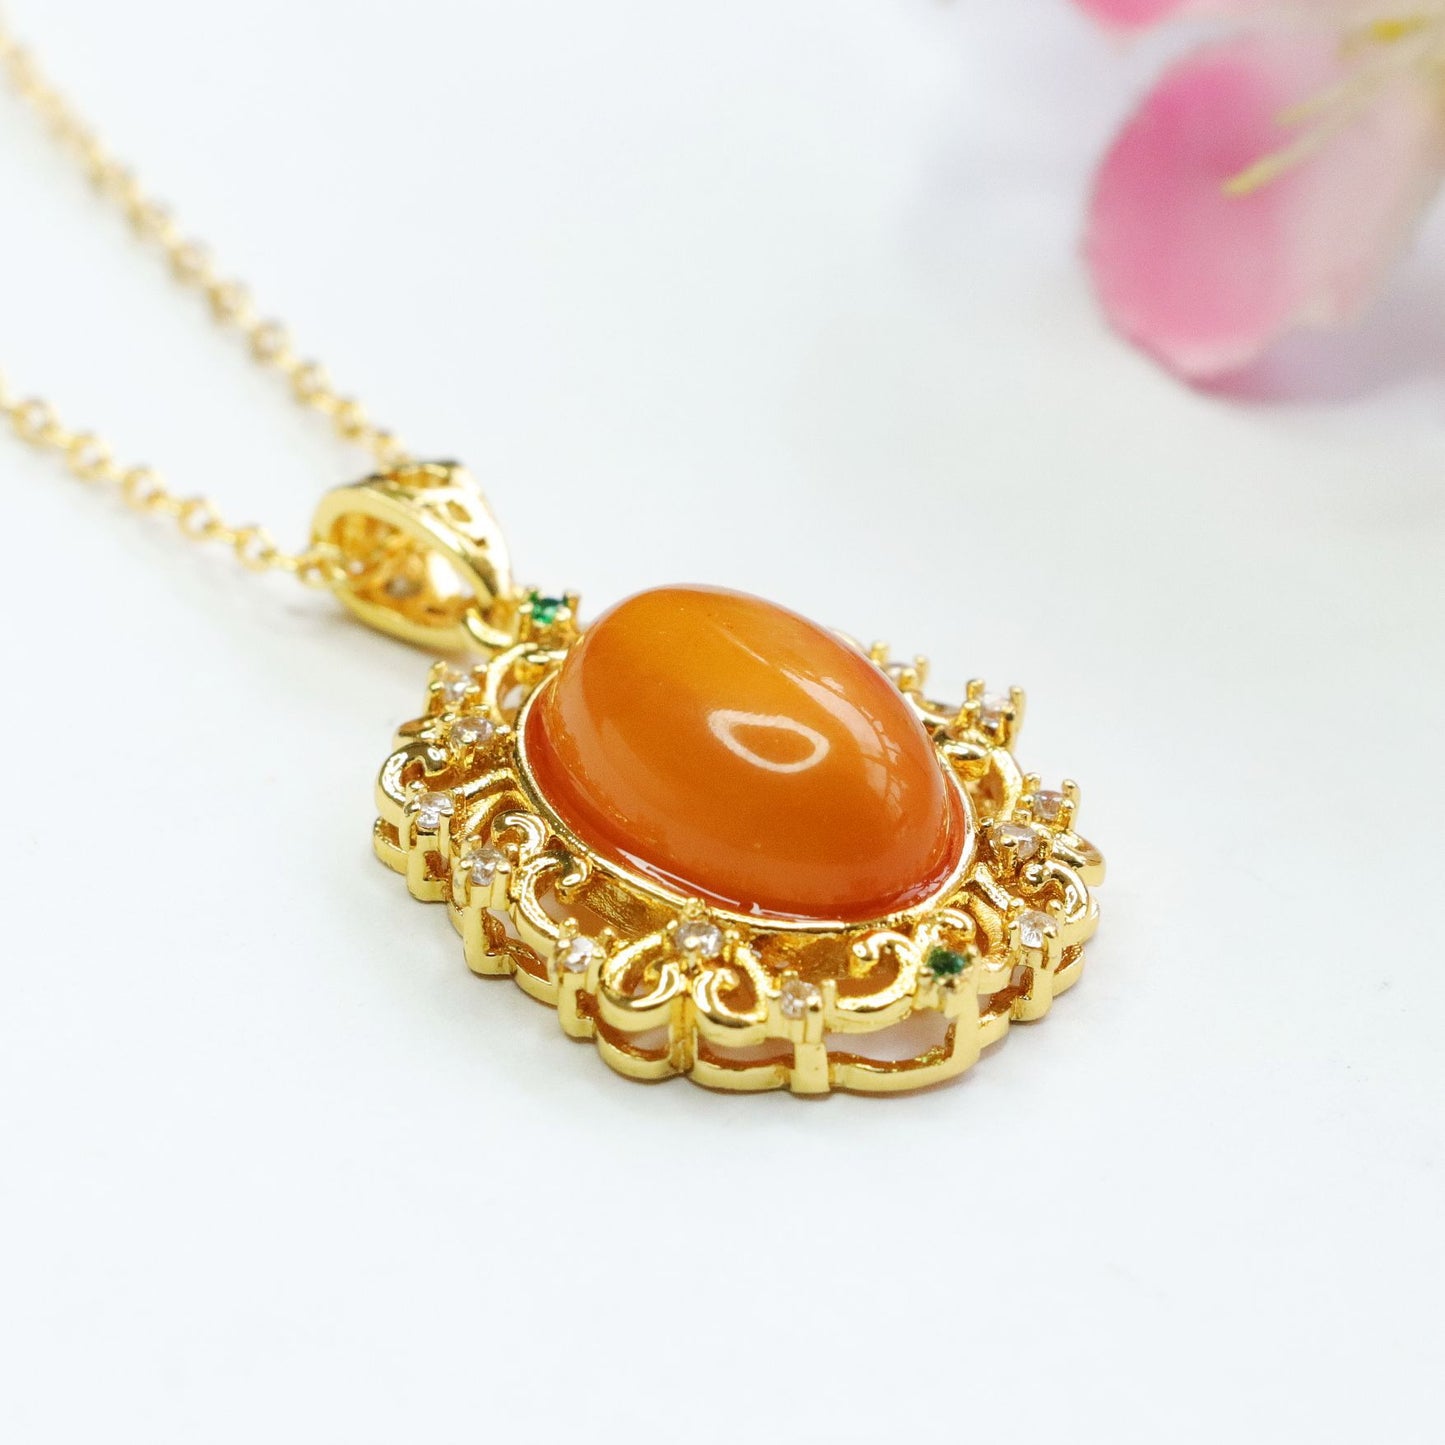 Golden Amber Beeswax Pendant Necklace with Zircon Accents